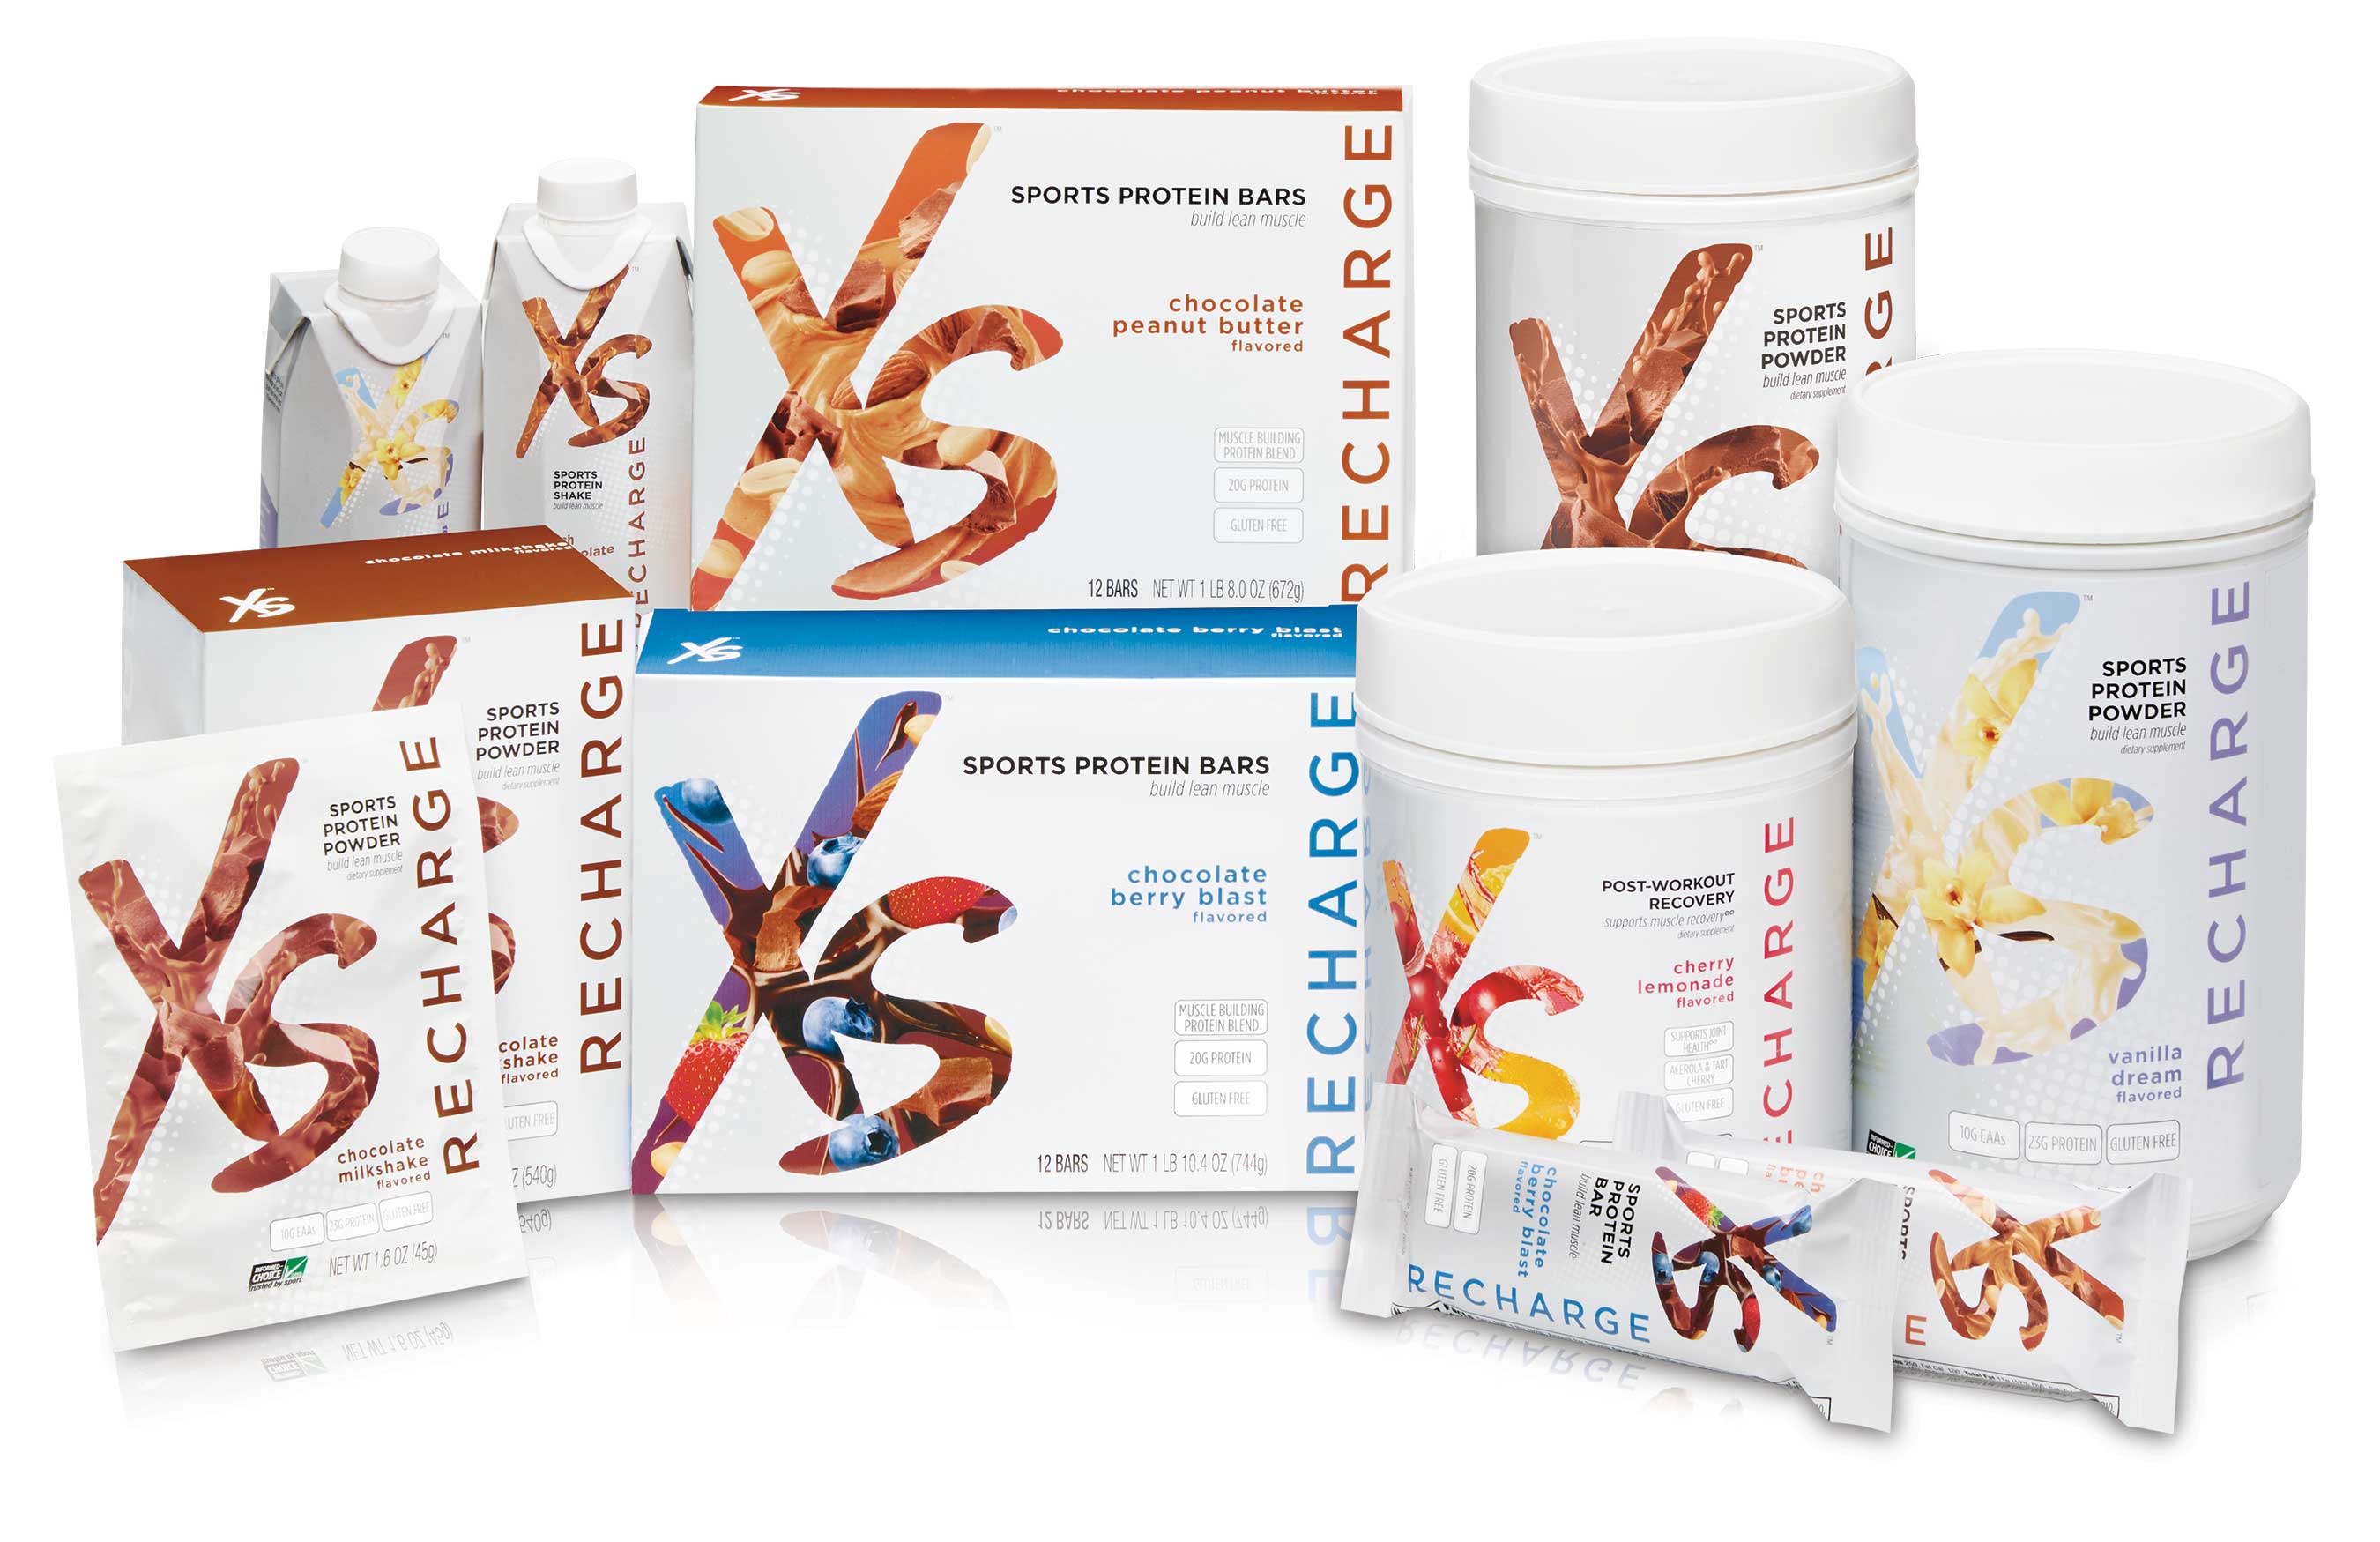 Amway XS Logo - Amway Announces Launch of XS Sports Nutrition Line